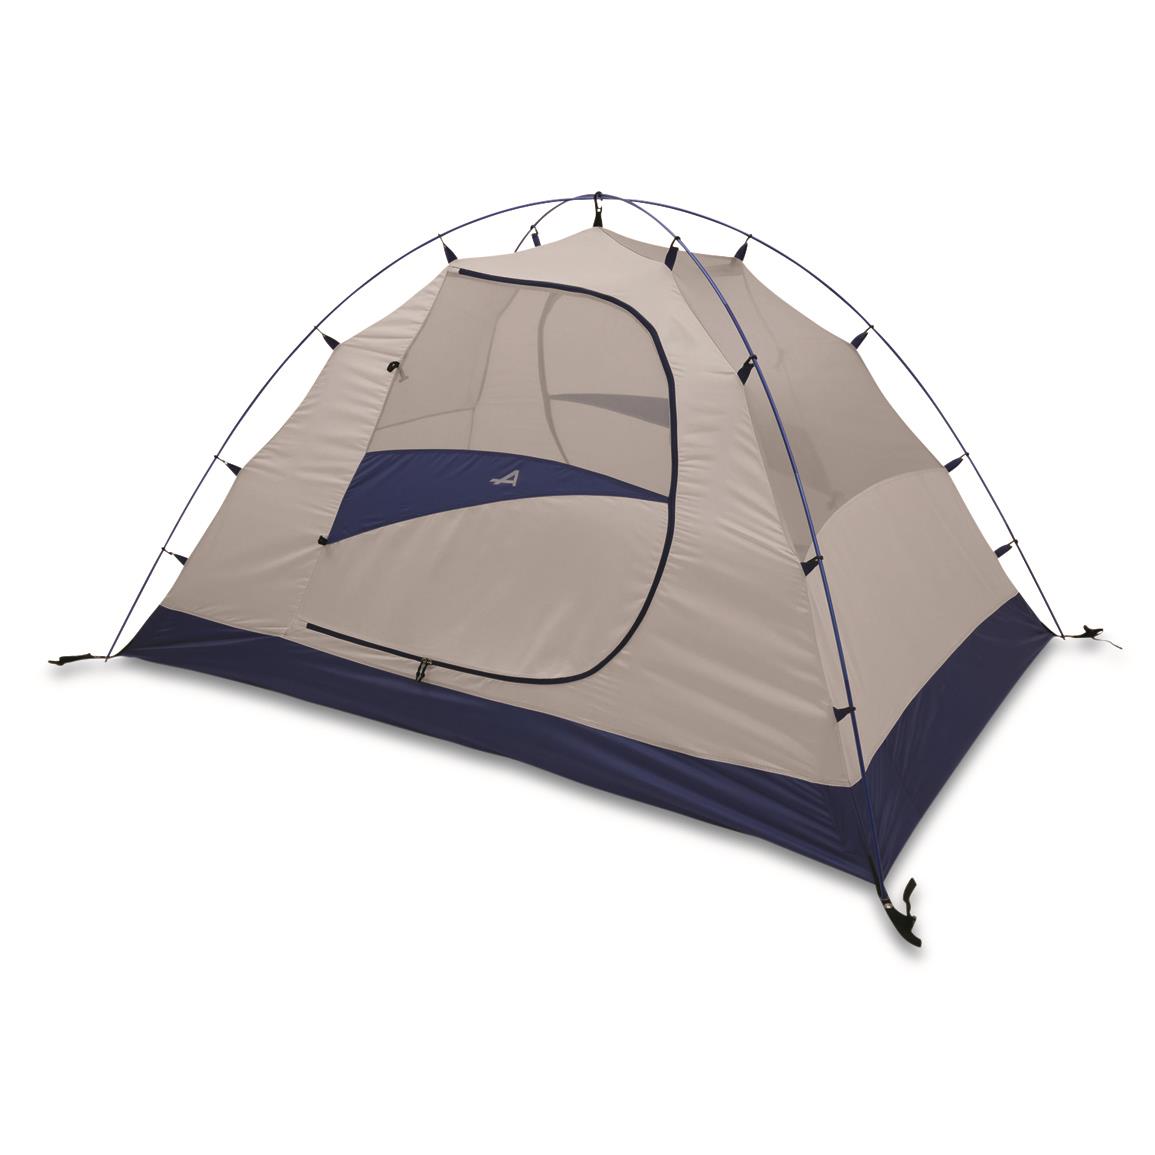 ALPS Mountaineering Lynx Tent, 3-Person, Gray/Navy